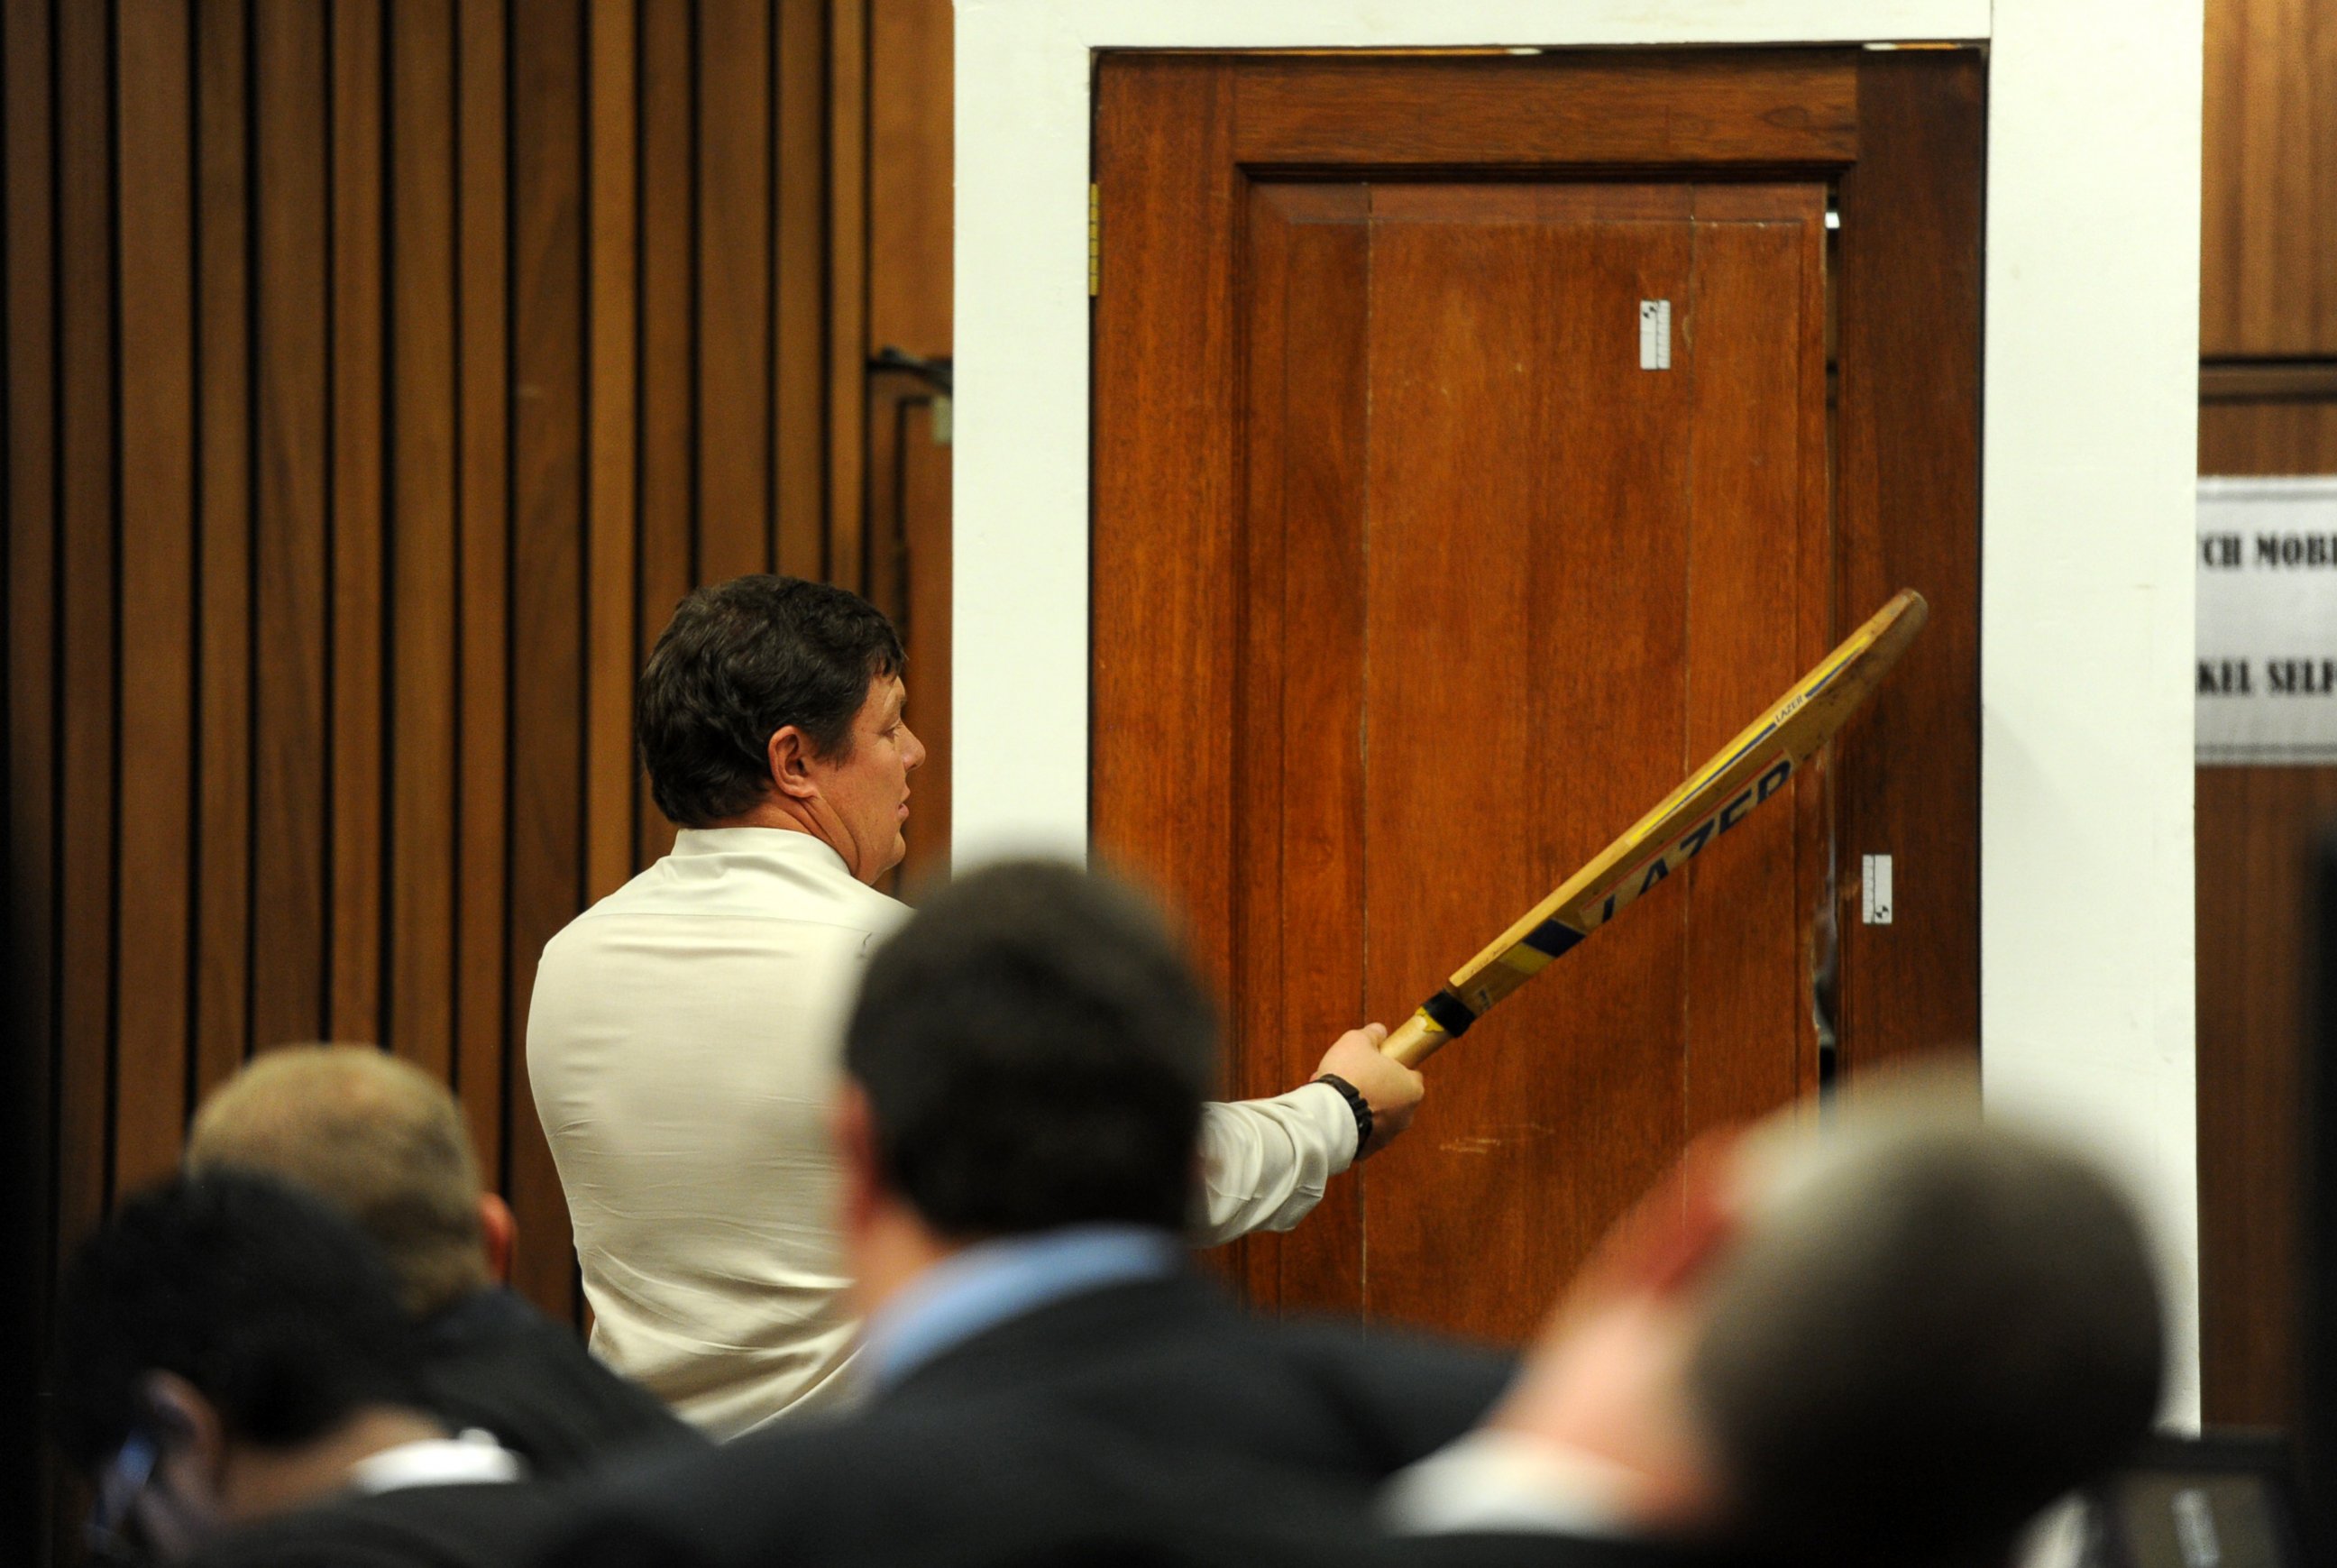 PHOTO: Forensic investigator Johannes Vermeulen takes part in the reconstruction of hitting a door with a cricket bat during the trial of Oscar Pistorius in Pretoria, South Africa on March 12, 2014.